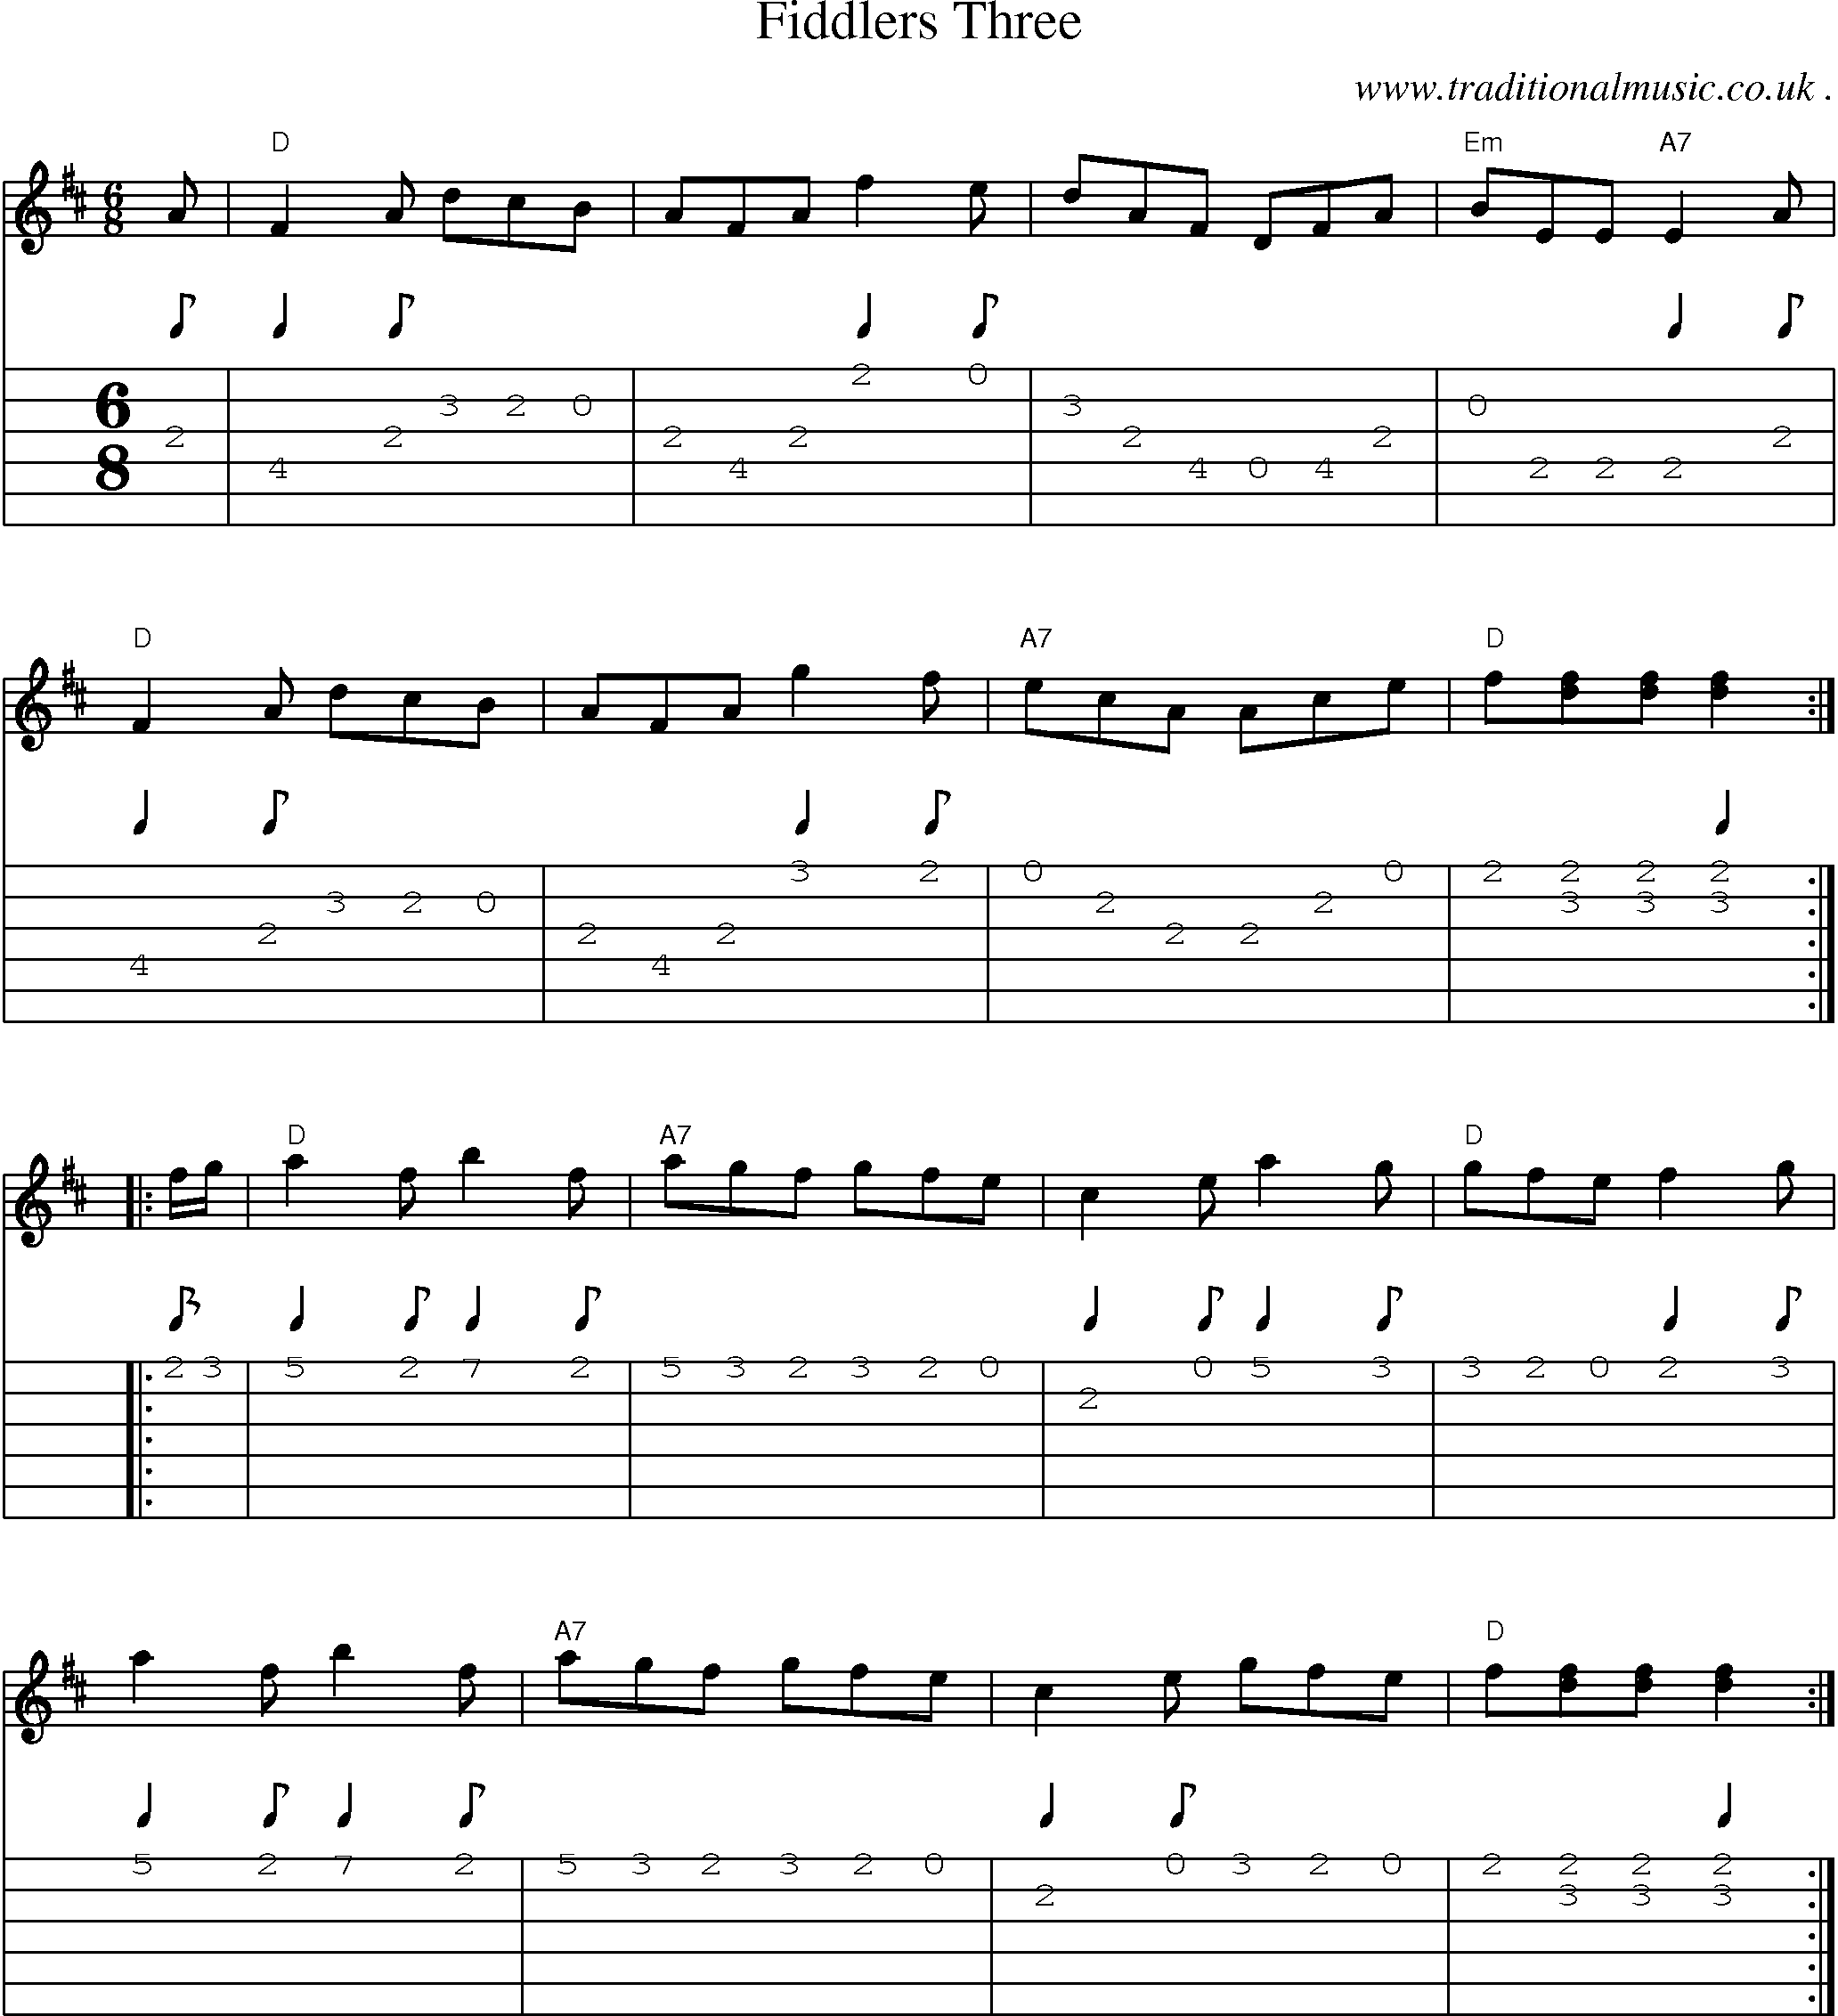 Sheet-Music and Guitar Tabs for Fiddlers Three